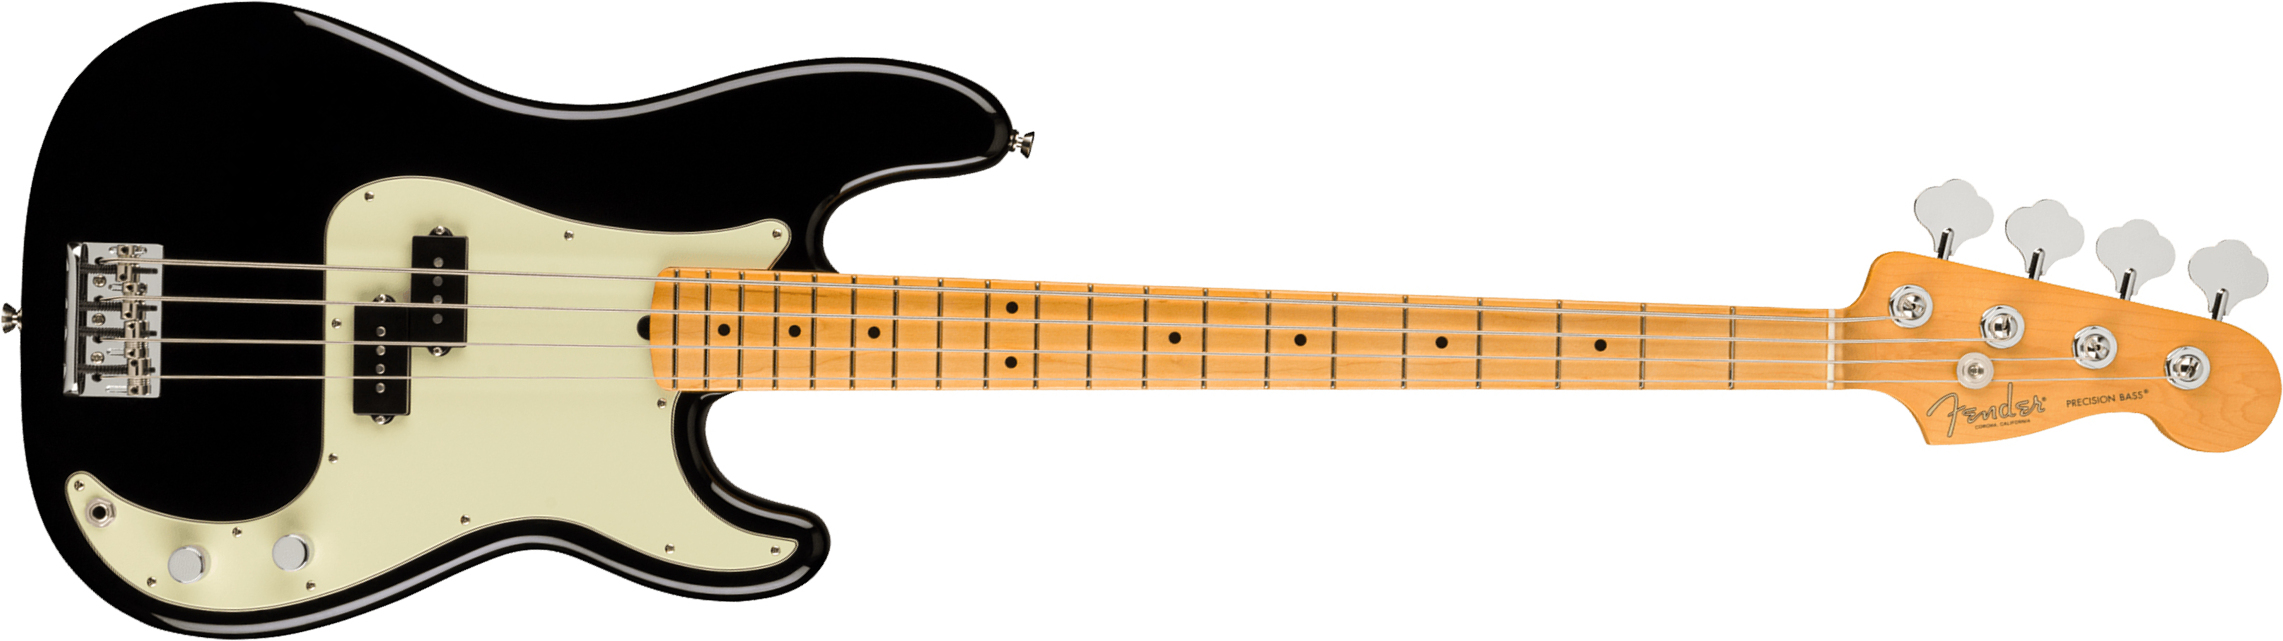 Fender Precision Bass American Professional Ii Usa Mn - Black - Basse Électrique Solid Body - Main picture